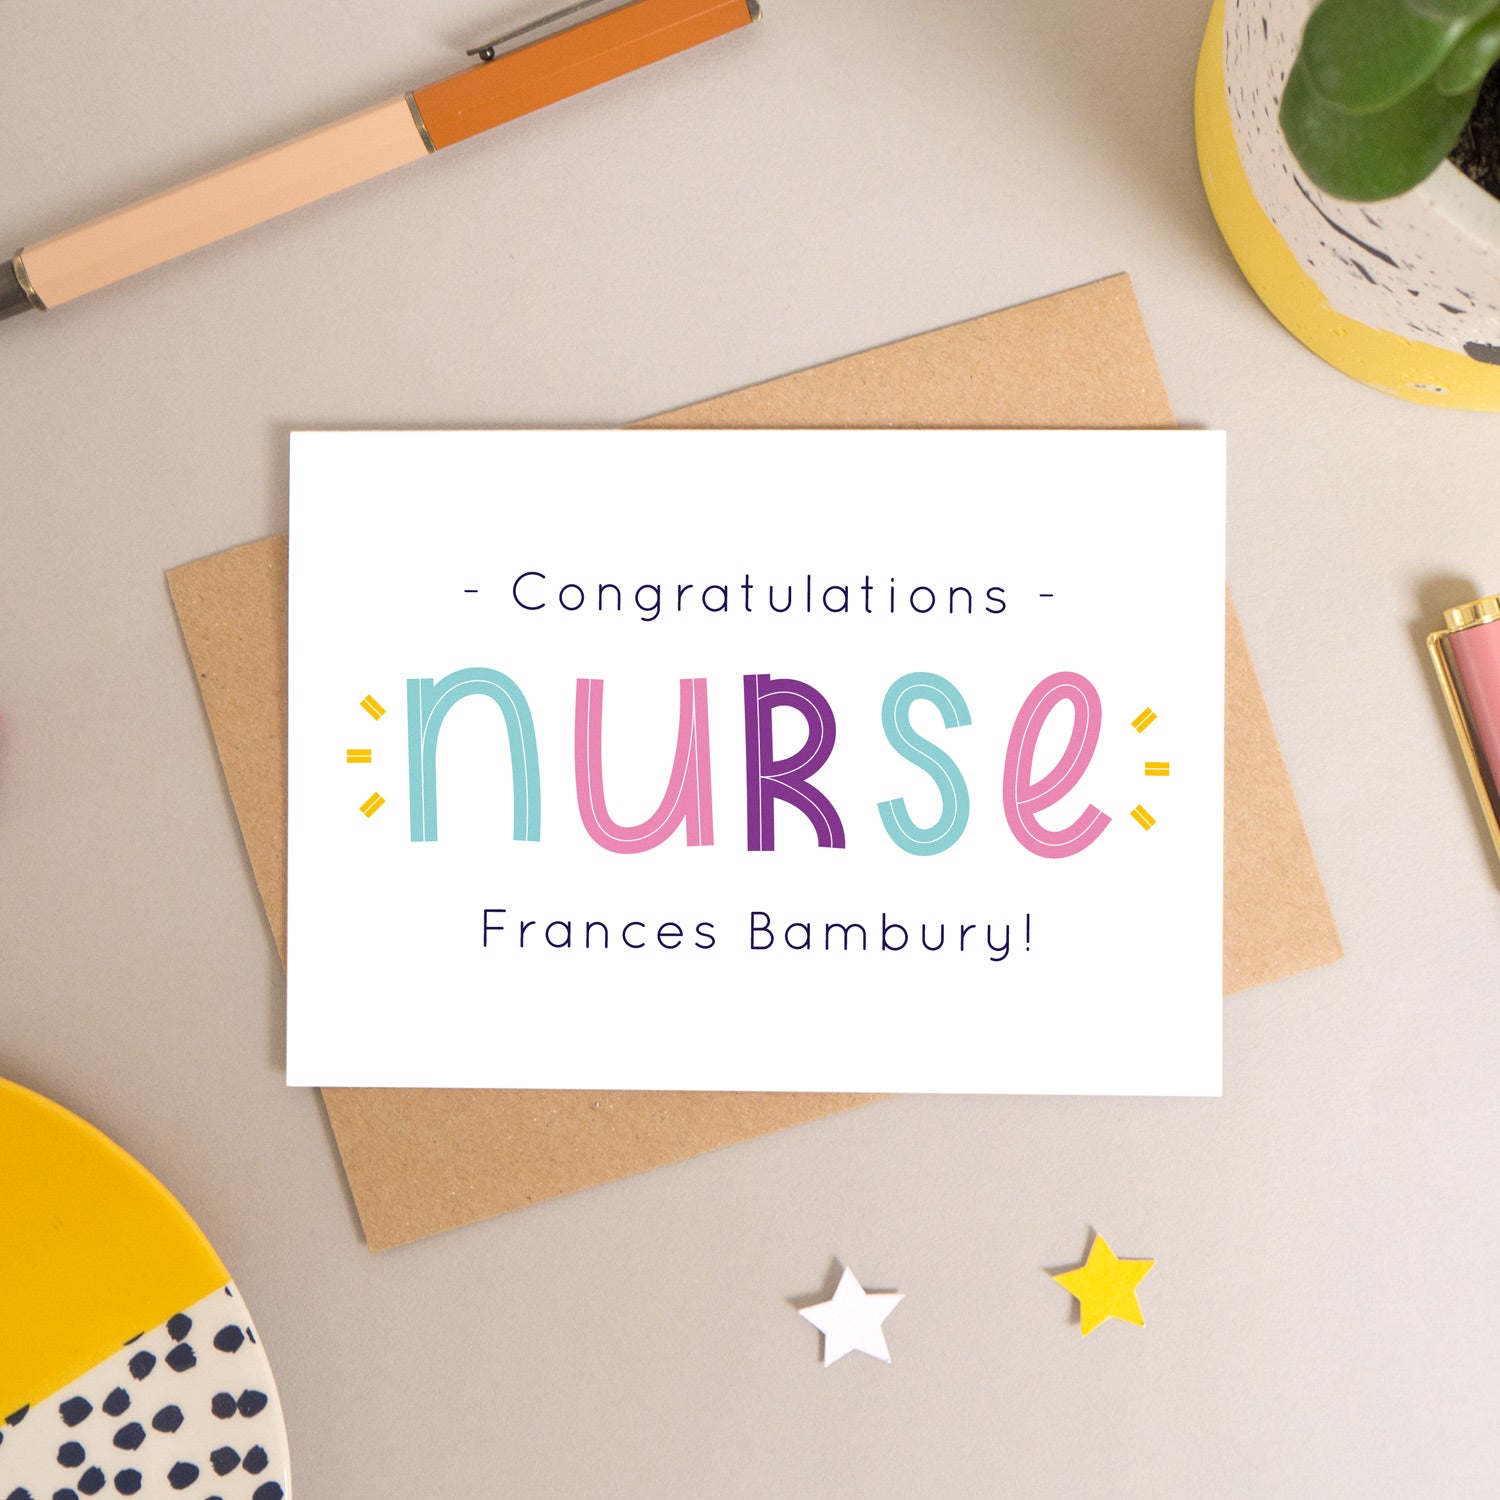 This personalised nurse card has been shot flatlay style looking directly over the top of the card. It is lying flat on it’s kraft brown envelope, on a warm grey background. Surrounding the card are pens, a clip, a plant and a trinket dish. This version of the card is in varying tones of navy and pink, purple and blue.